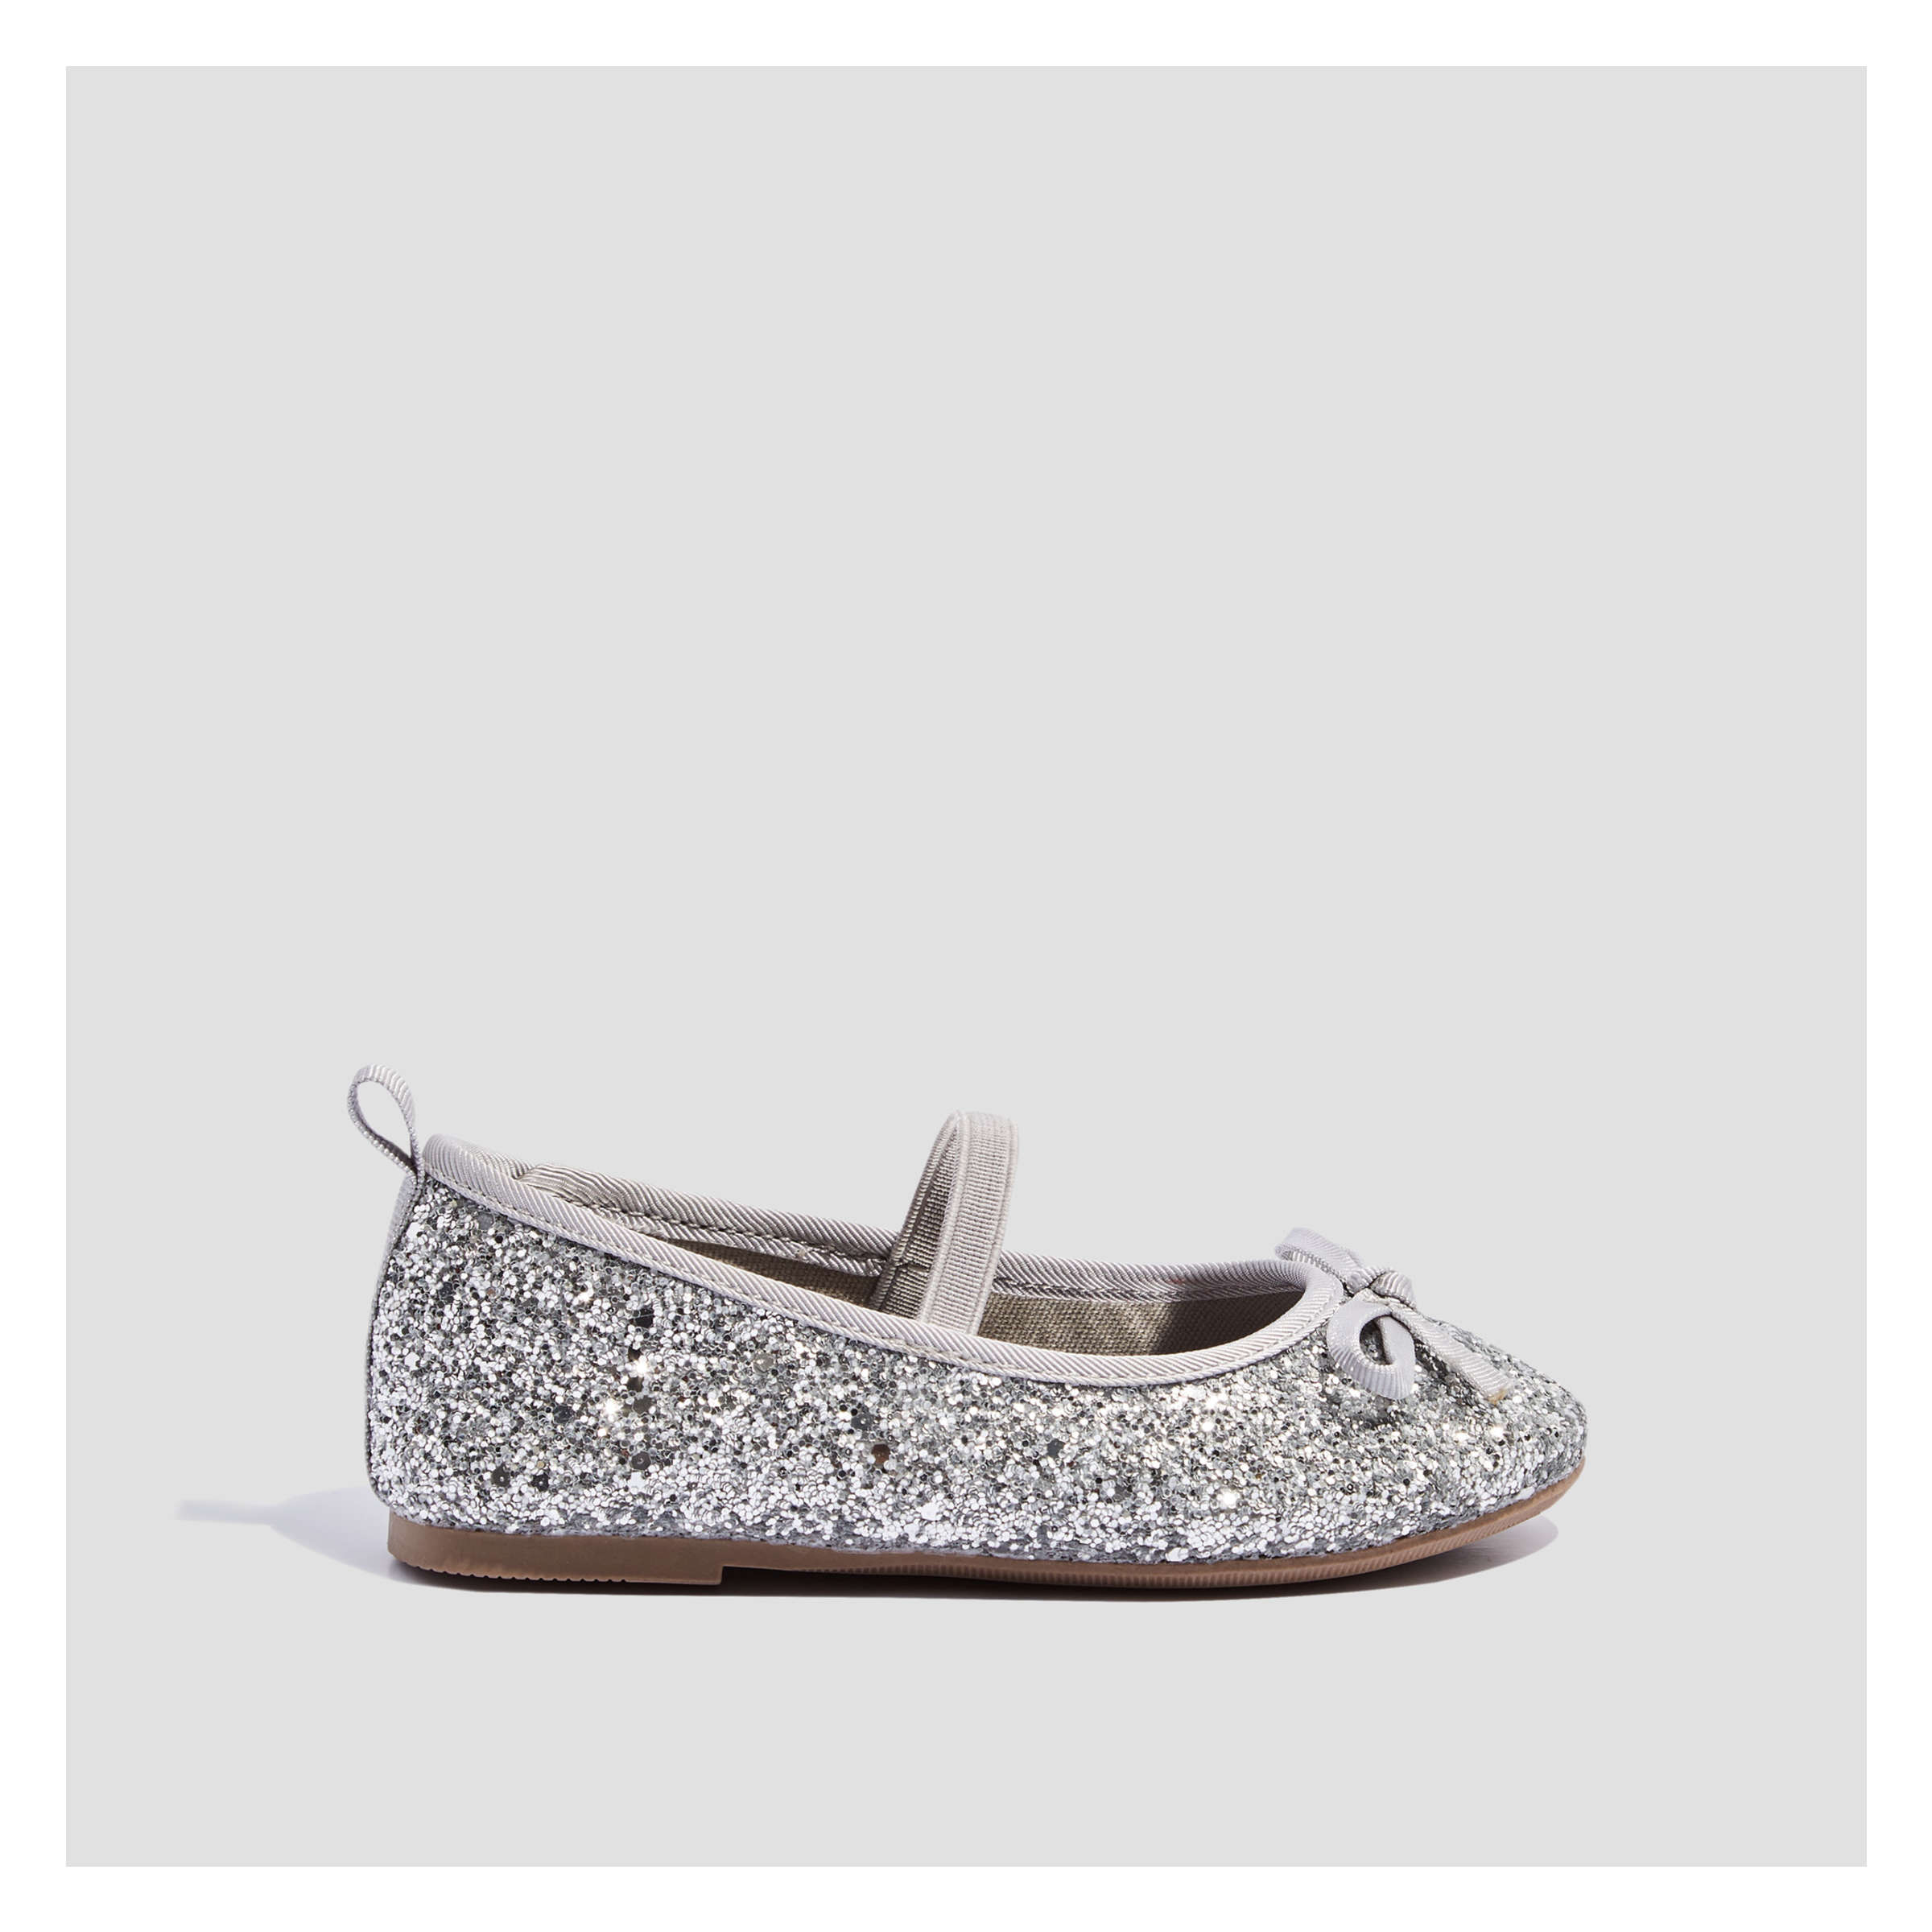 glitter ballet flats for toddlers